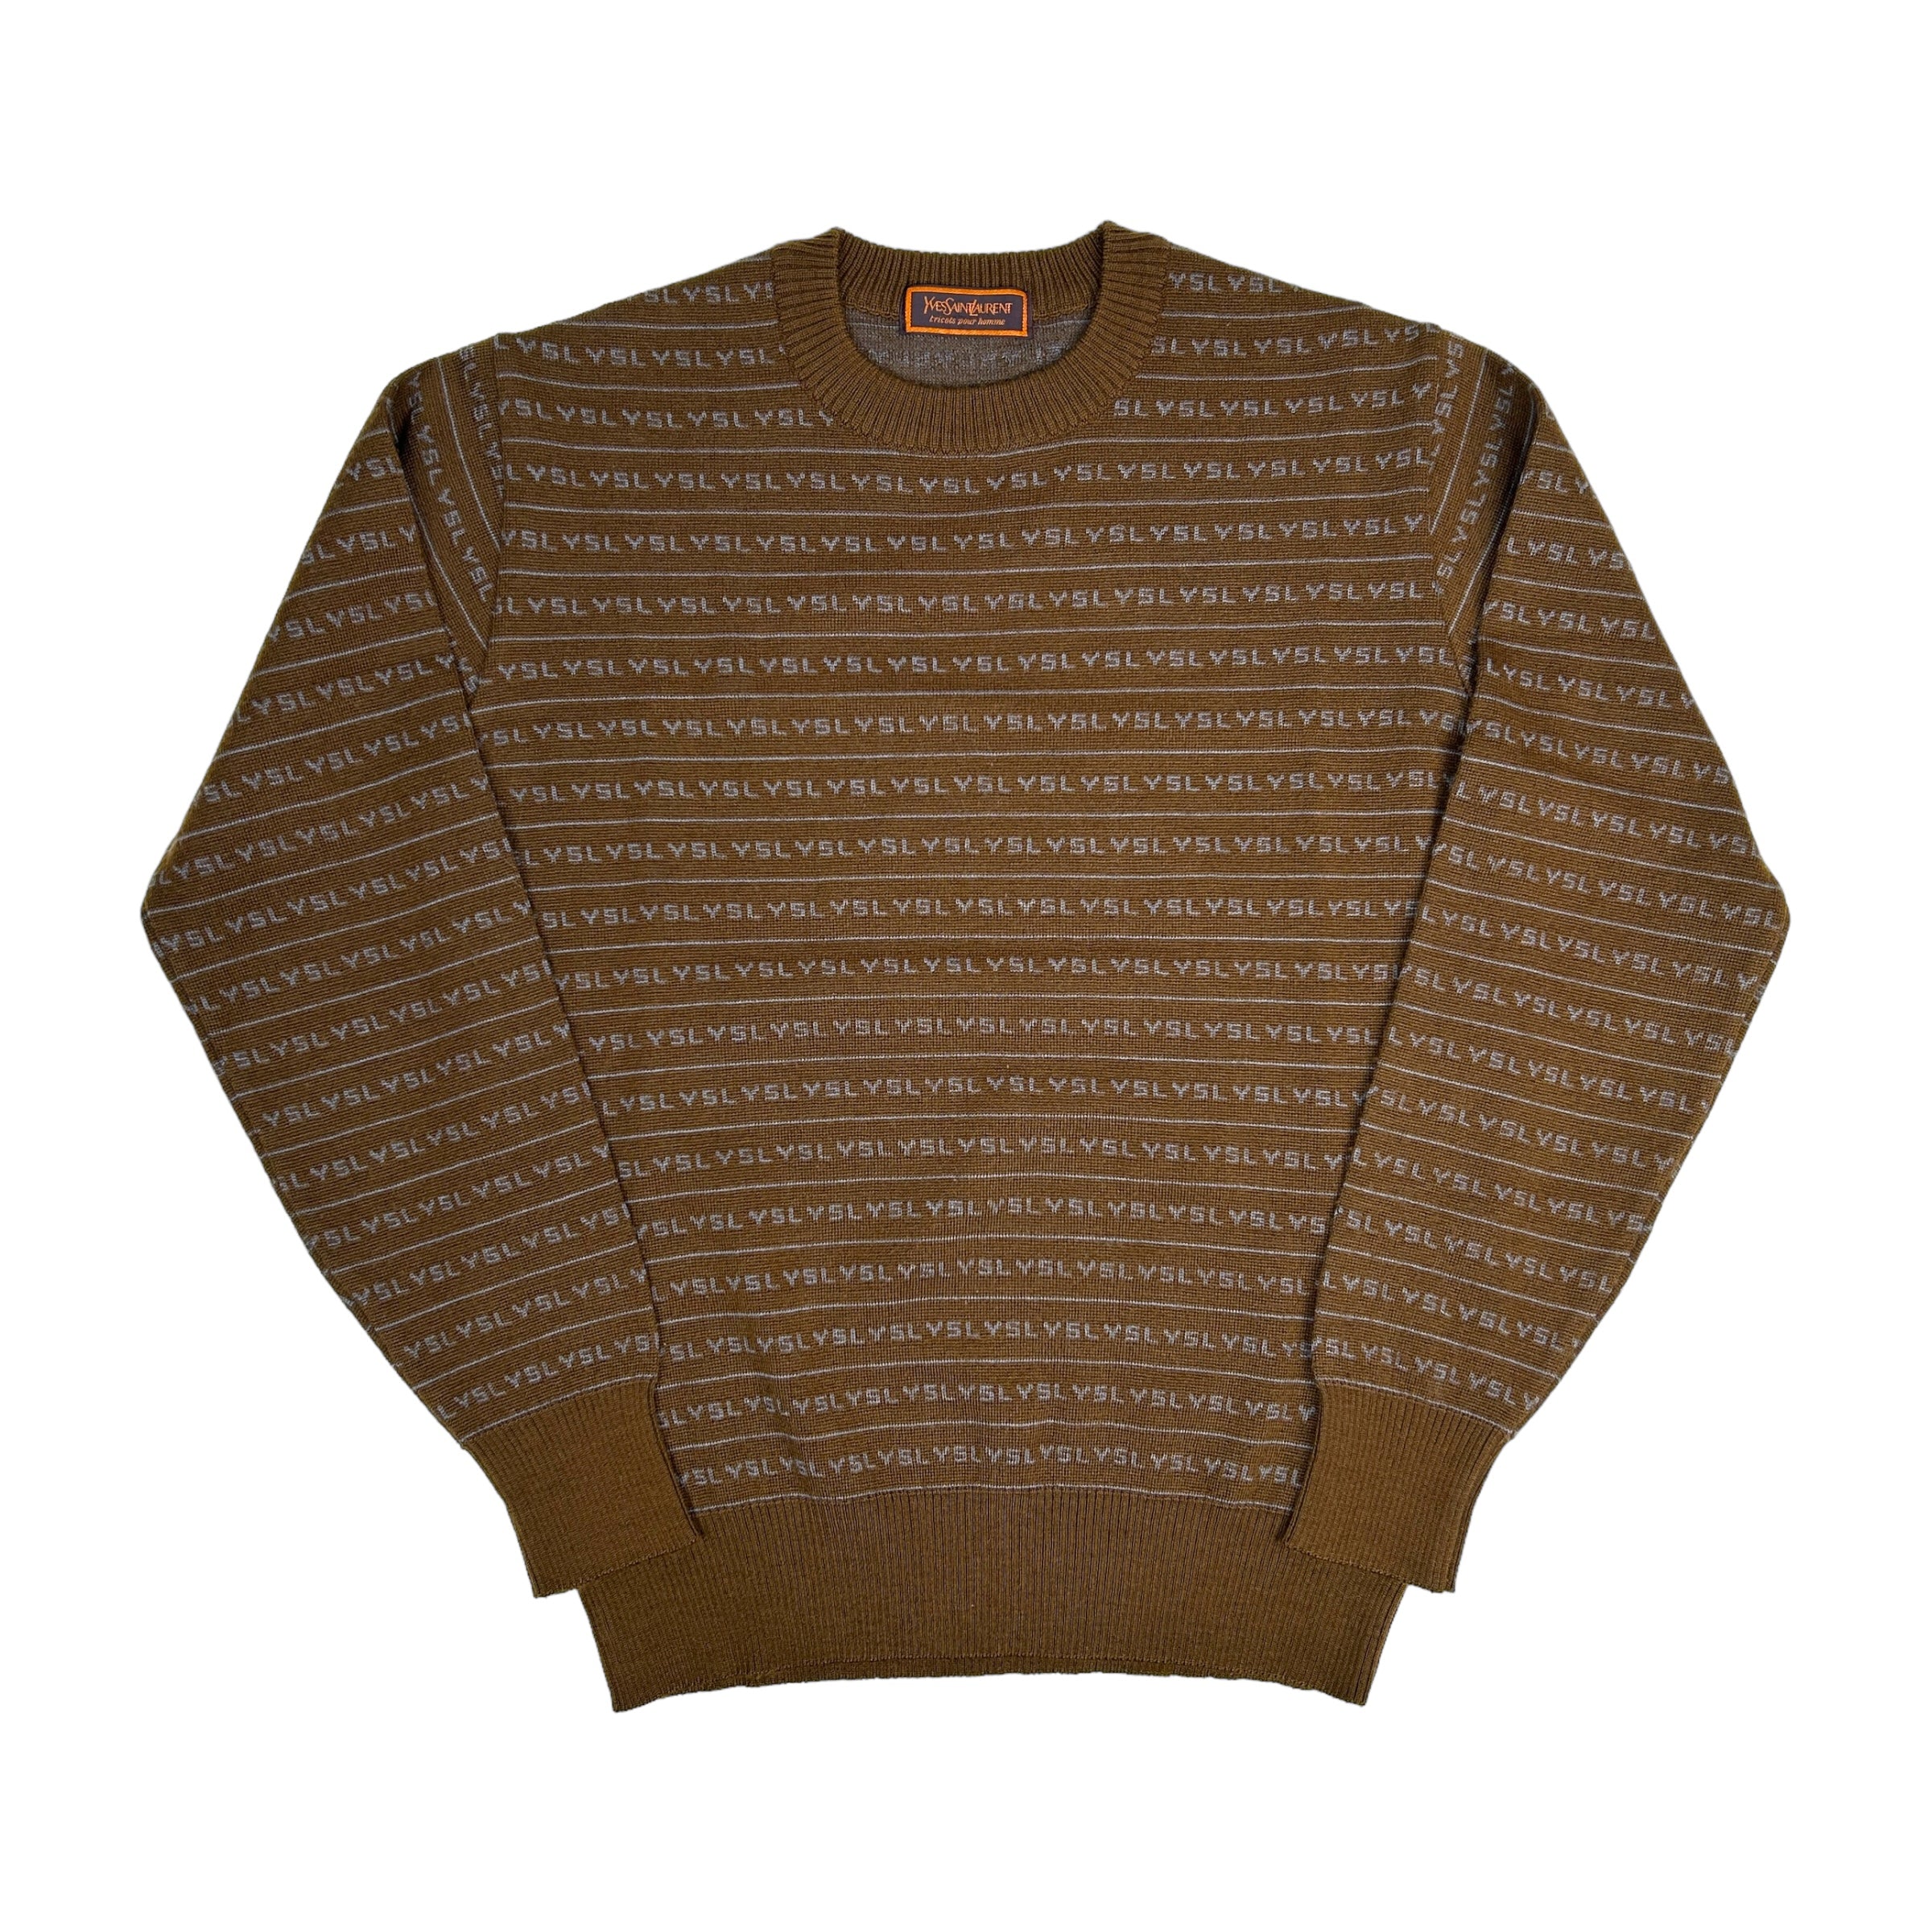 YSL BROWN AND BLUE REPEAT SPELLOUT KNIT SWEATER